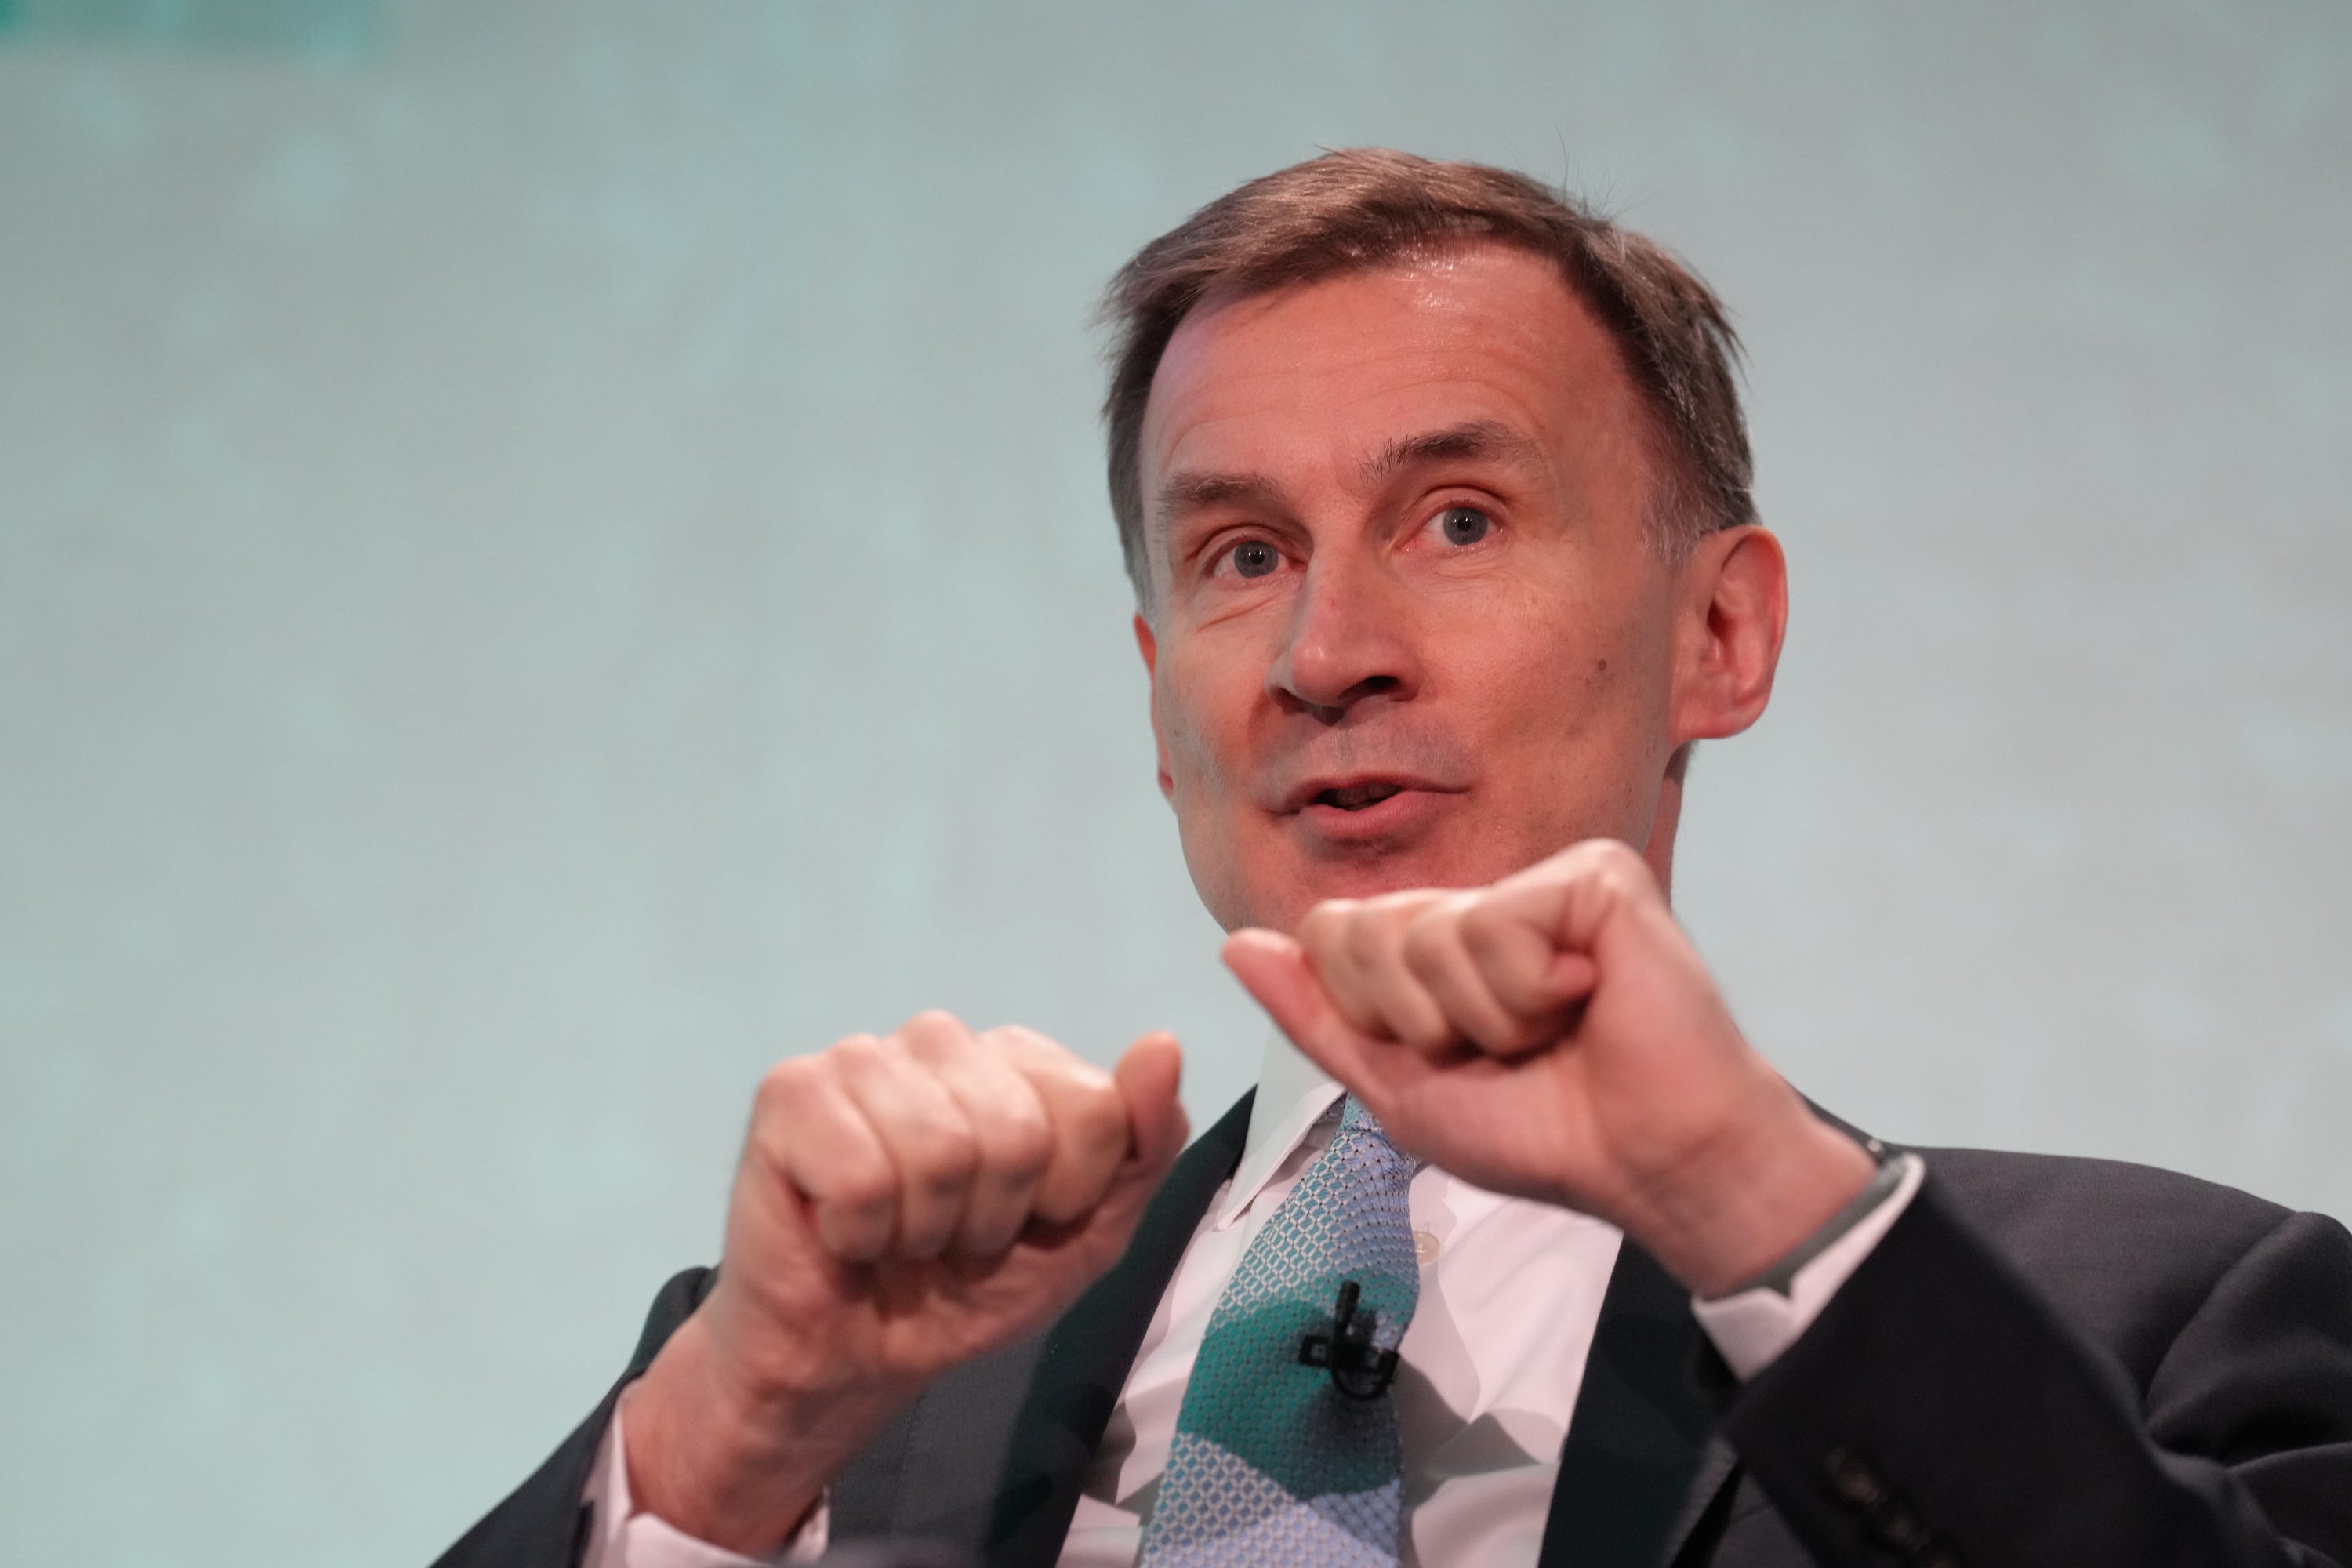 Jeremy Hunt said it was good news for households that interest rates appear to have peaked.